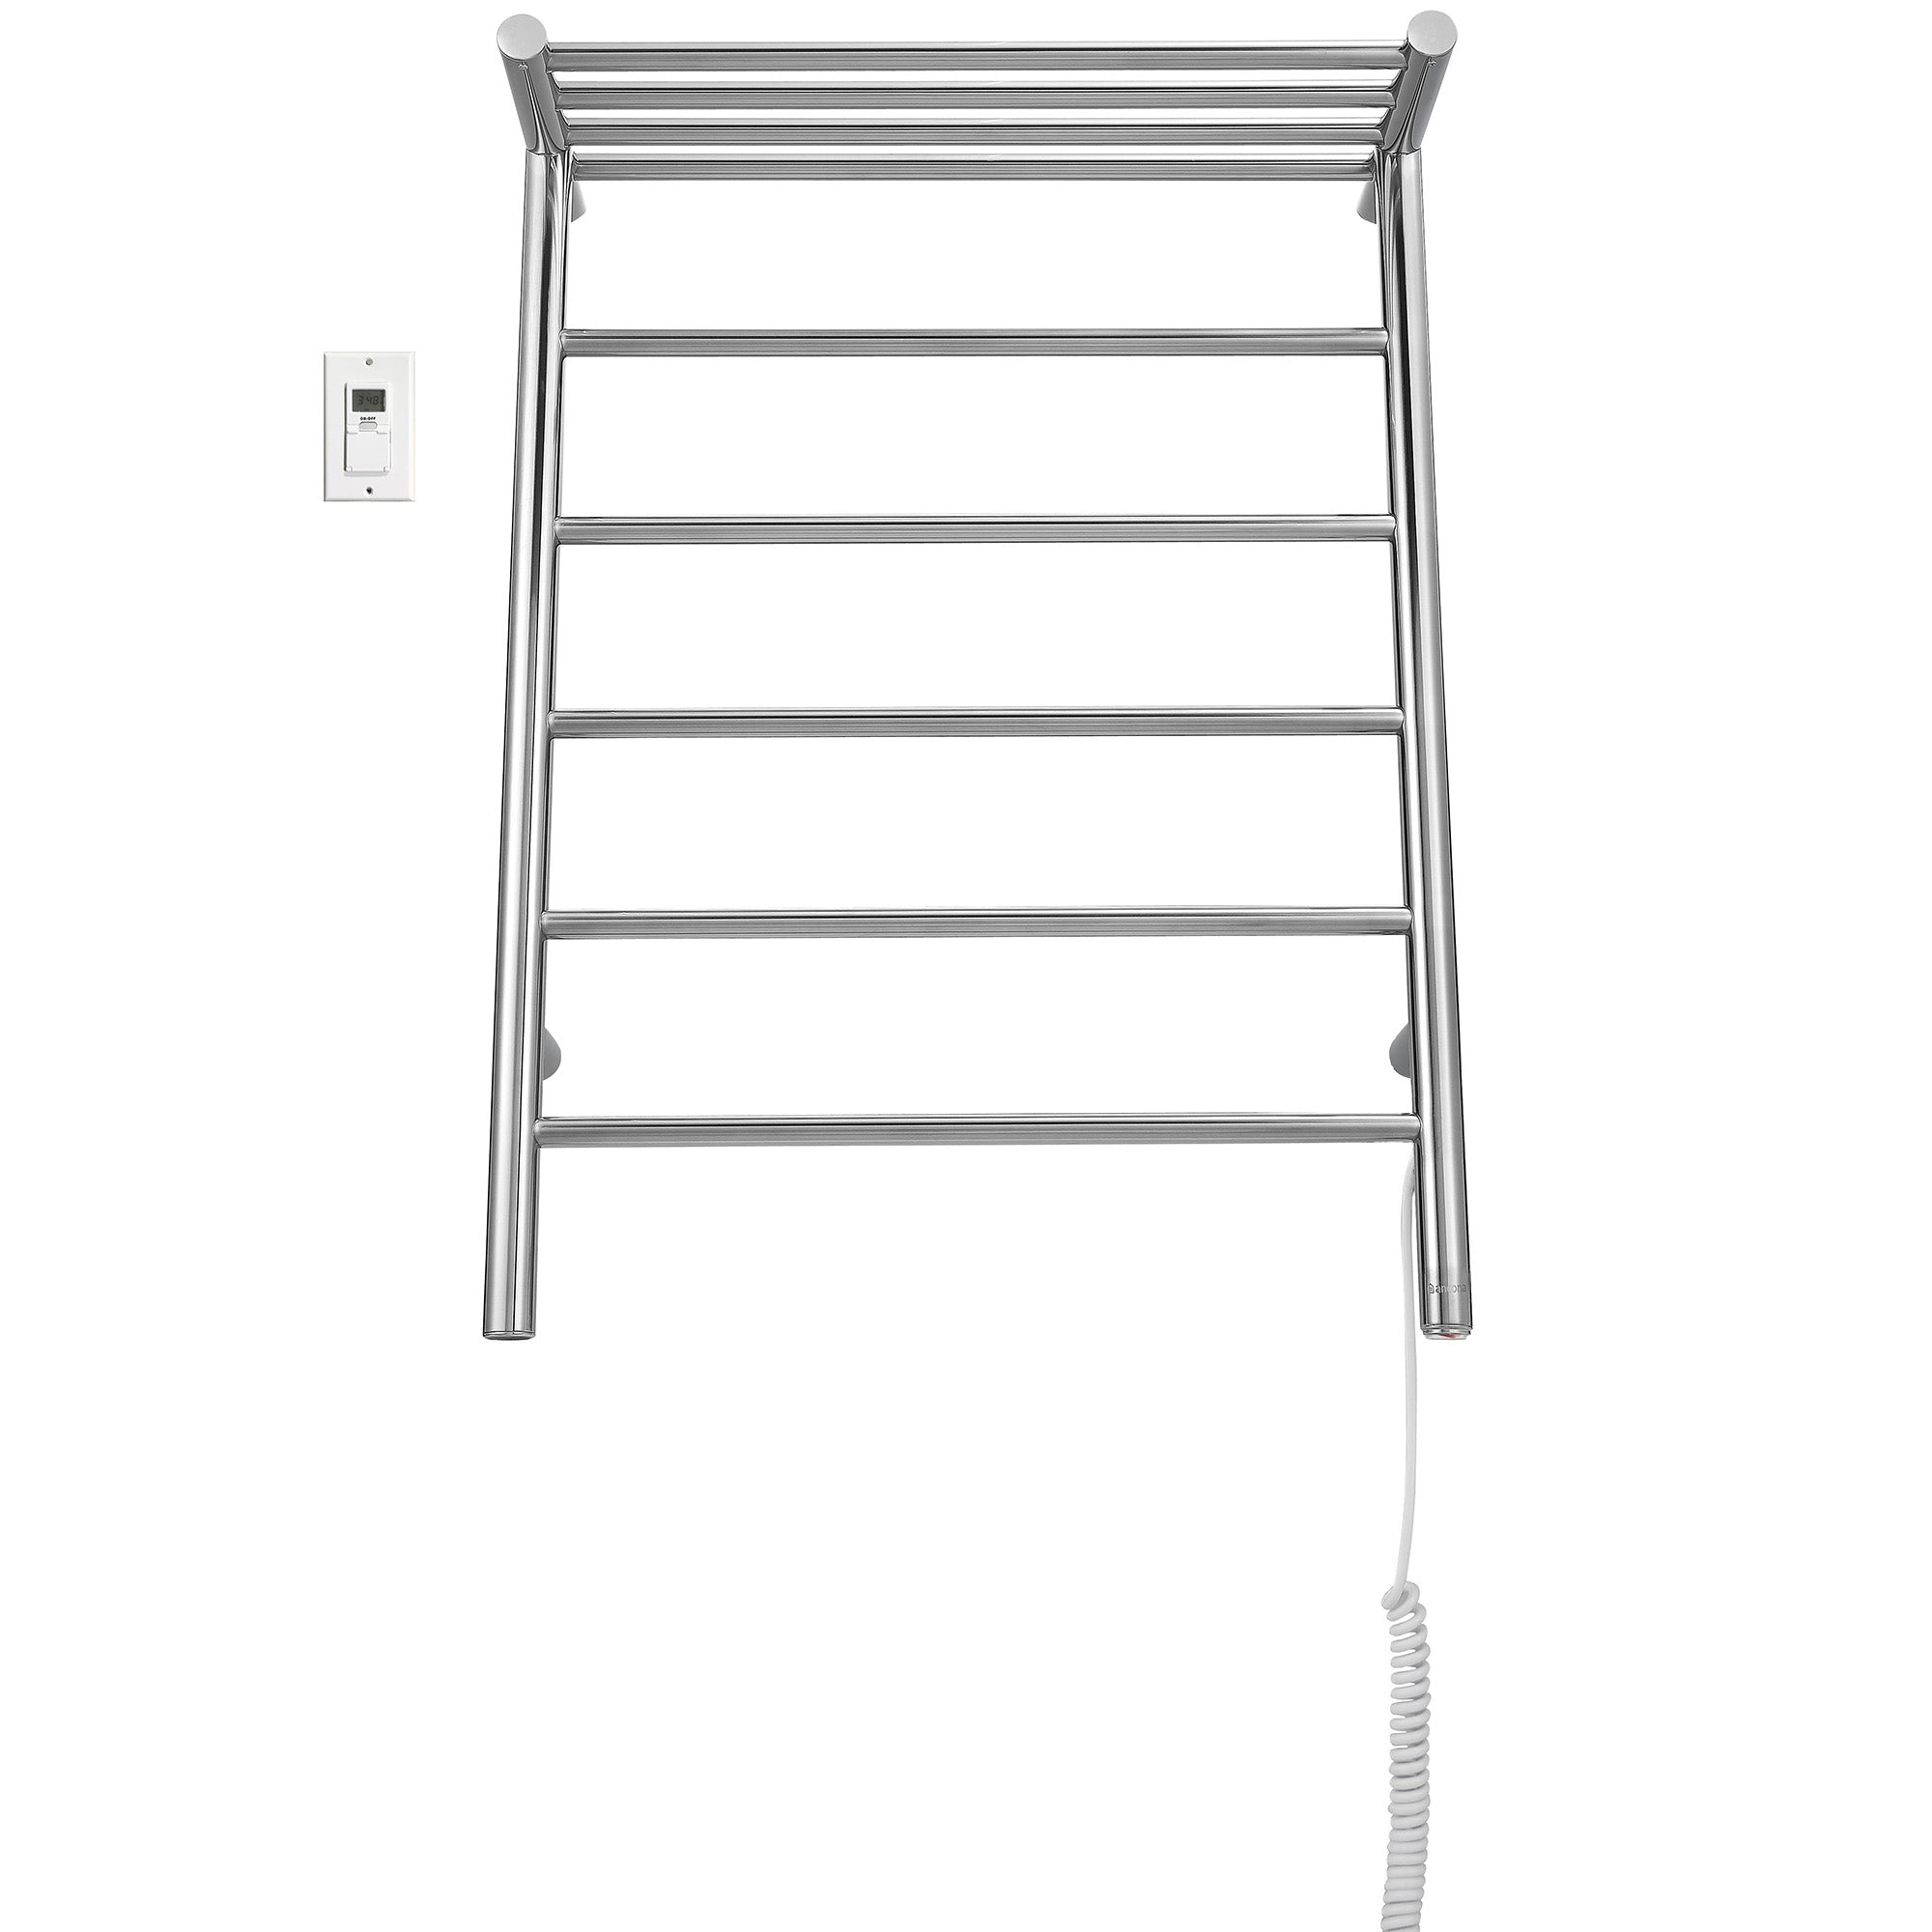 Miazzo 5-Bar Electric Wall Mount Plug-In and Hardwire Towel Warmer with Shelf in Polished Stainless Steel with Digital Wall Timer